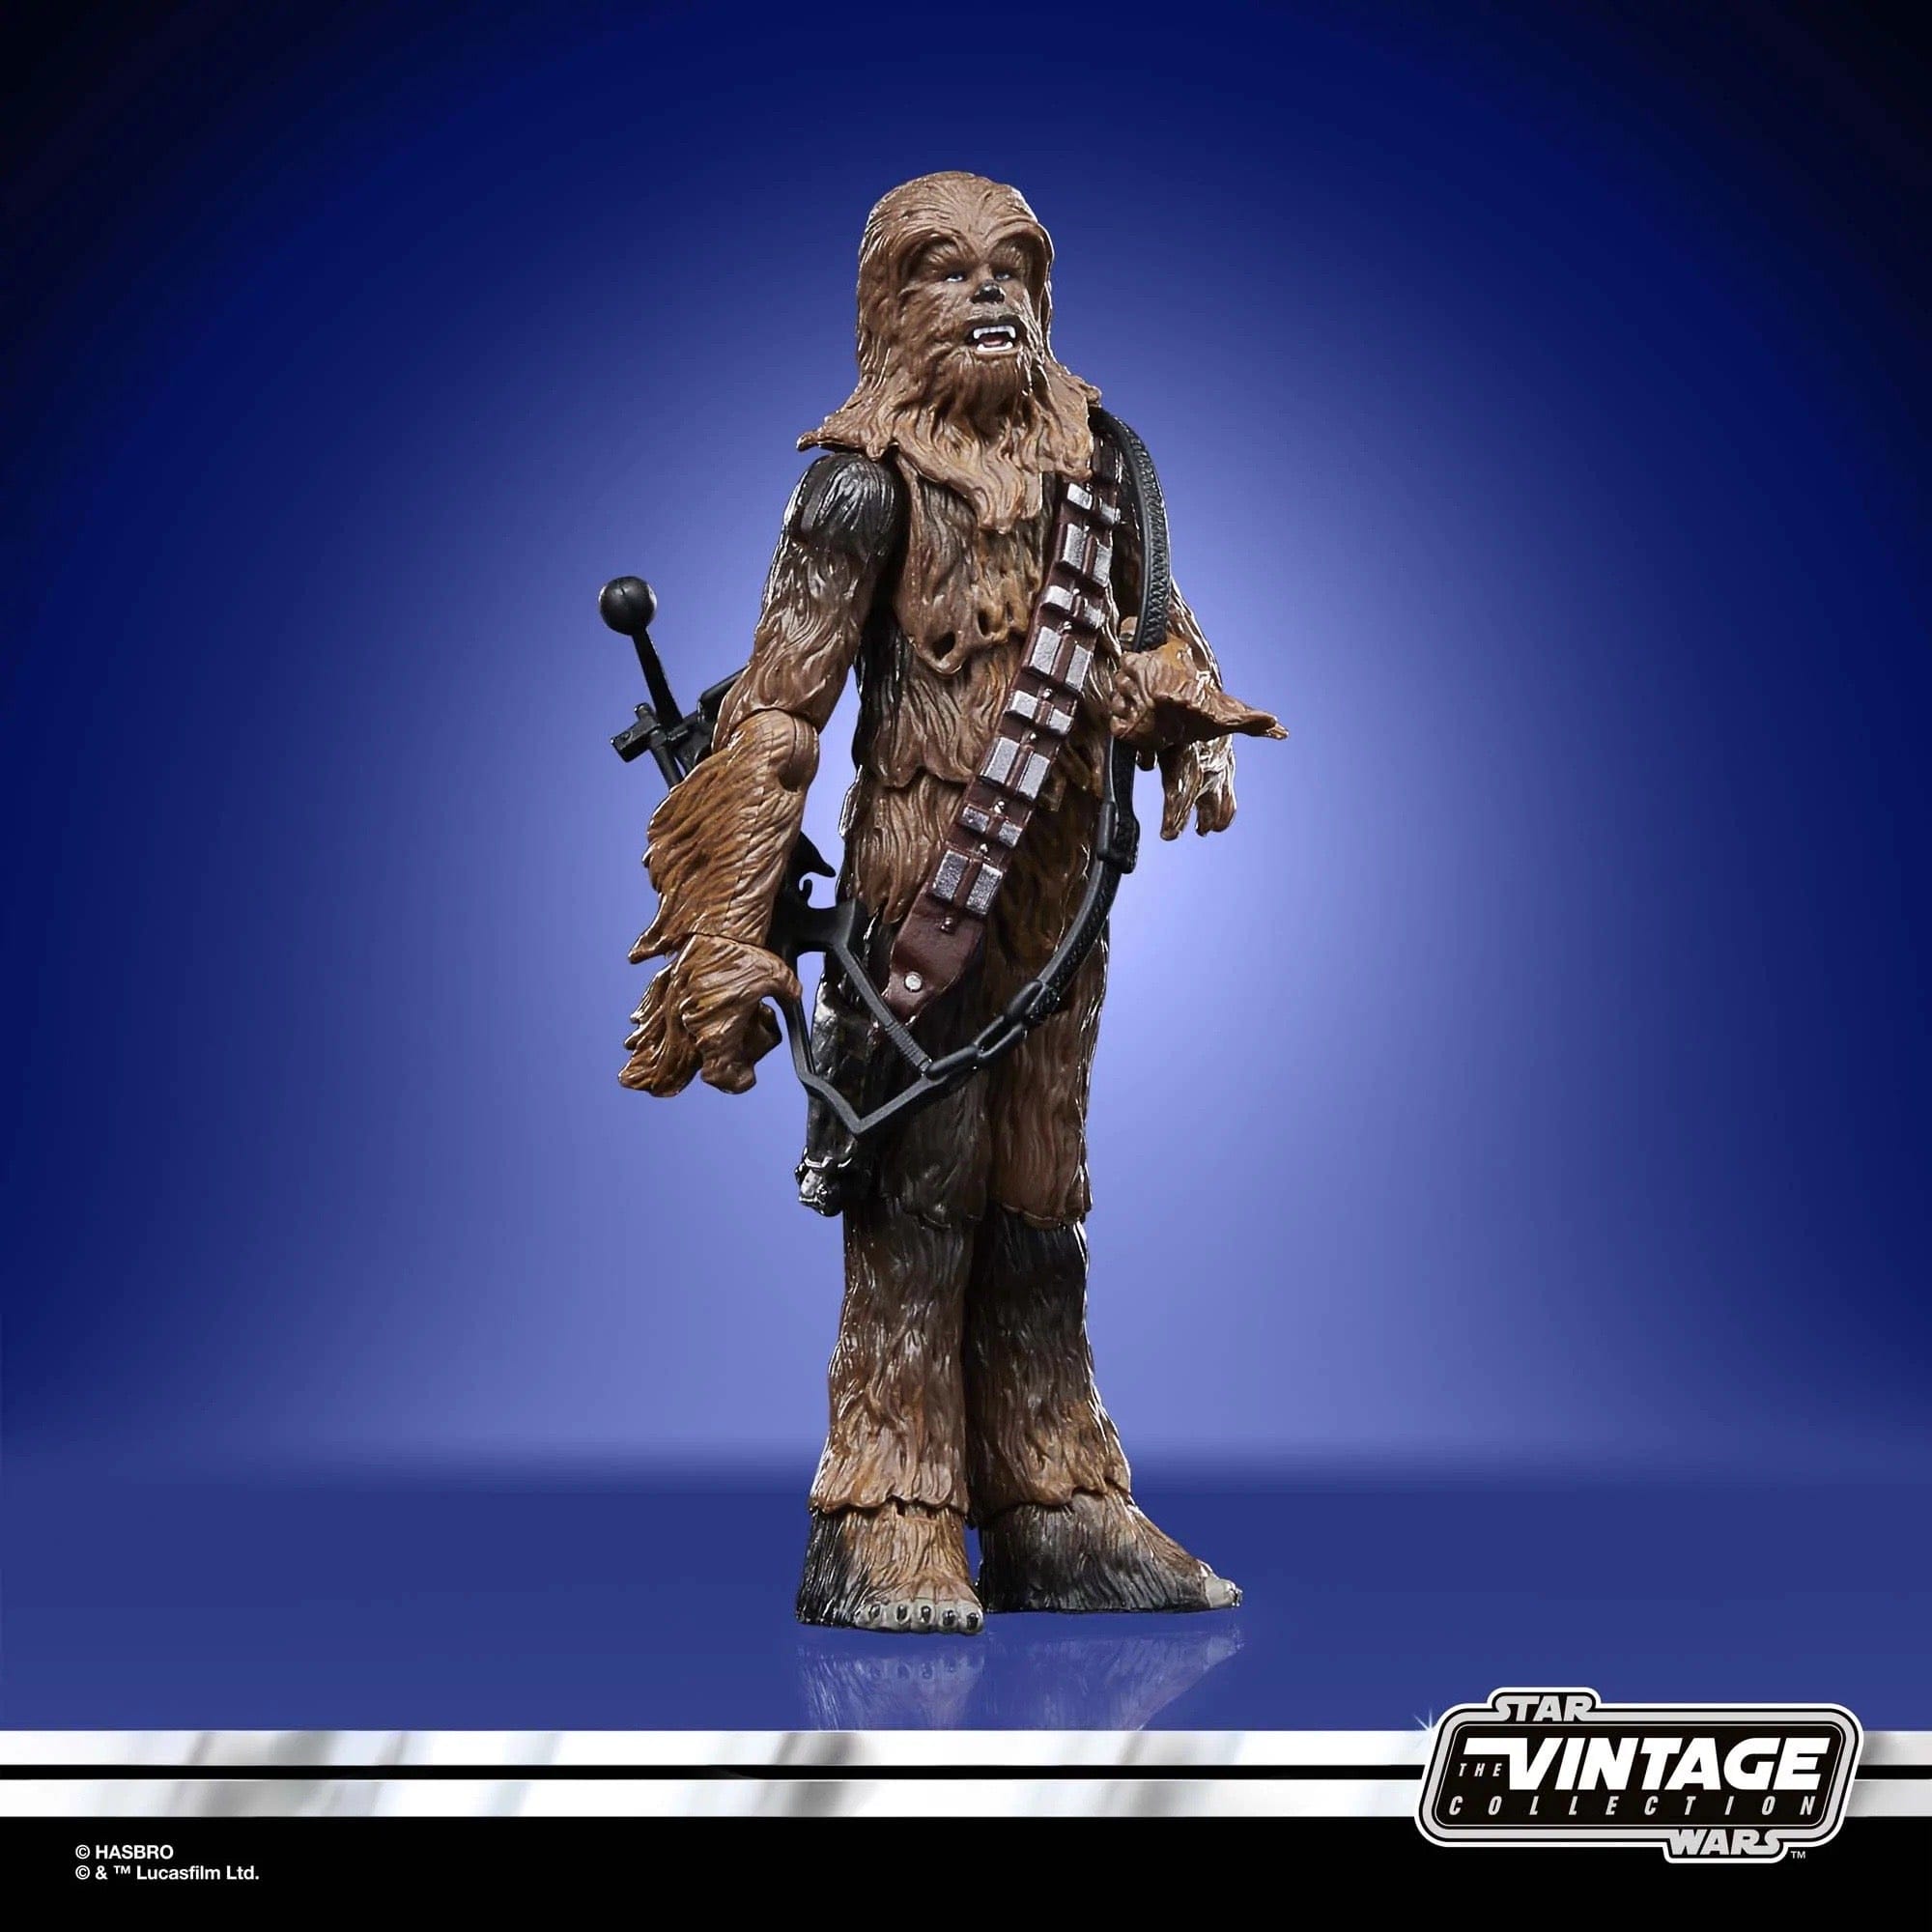 Hasbro Star Wars The Vintage Collection Return of the Jedi AT-ST and Chewbacca Action Figure Set